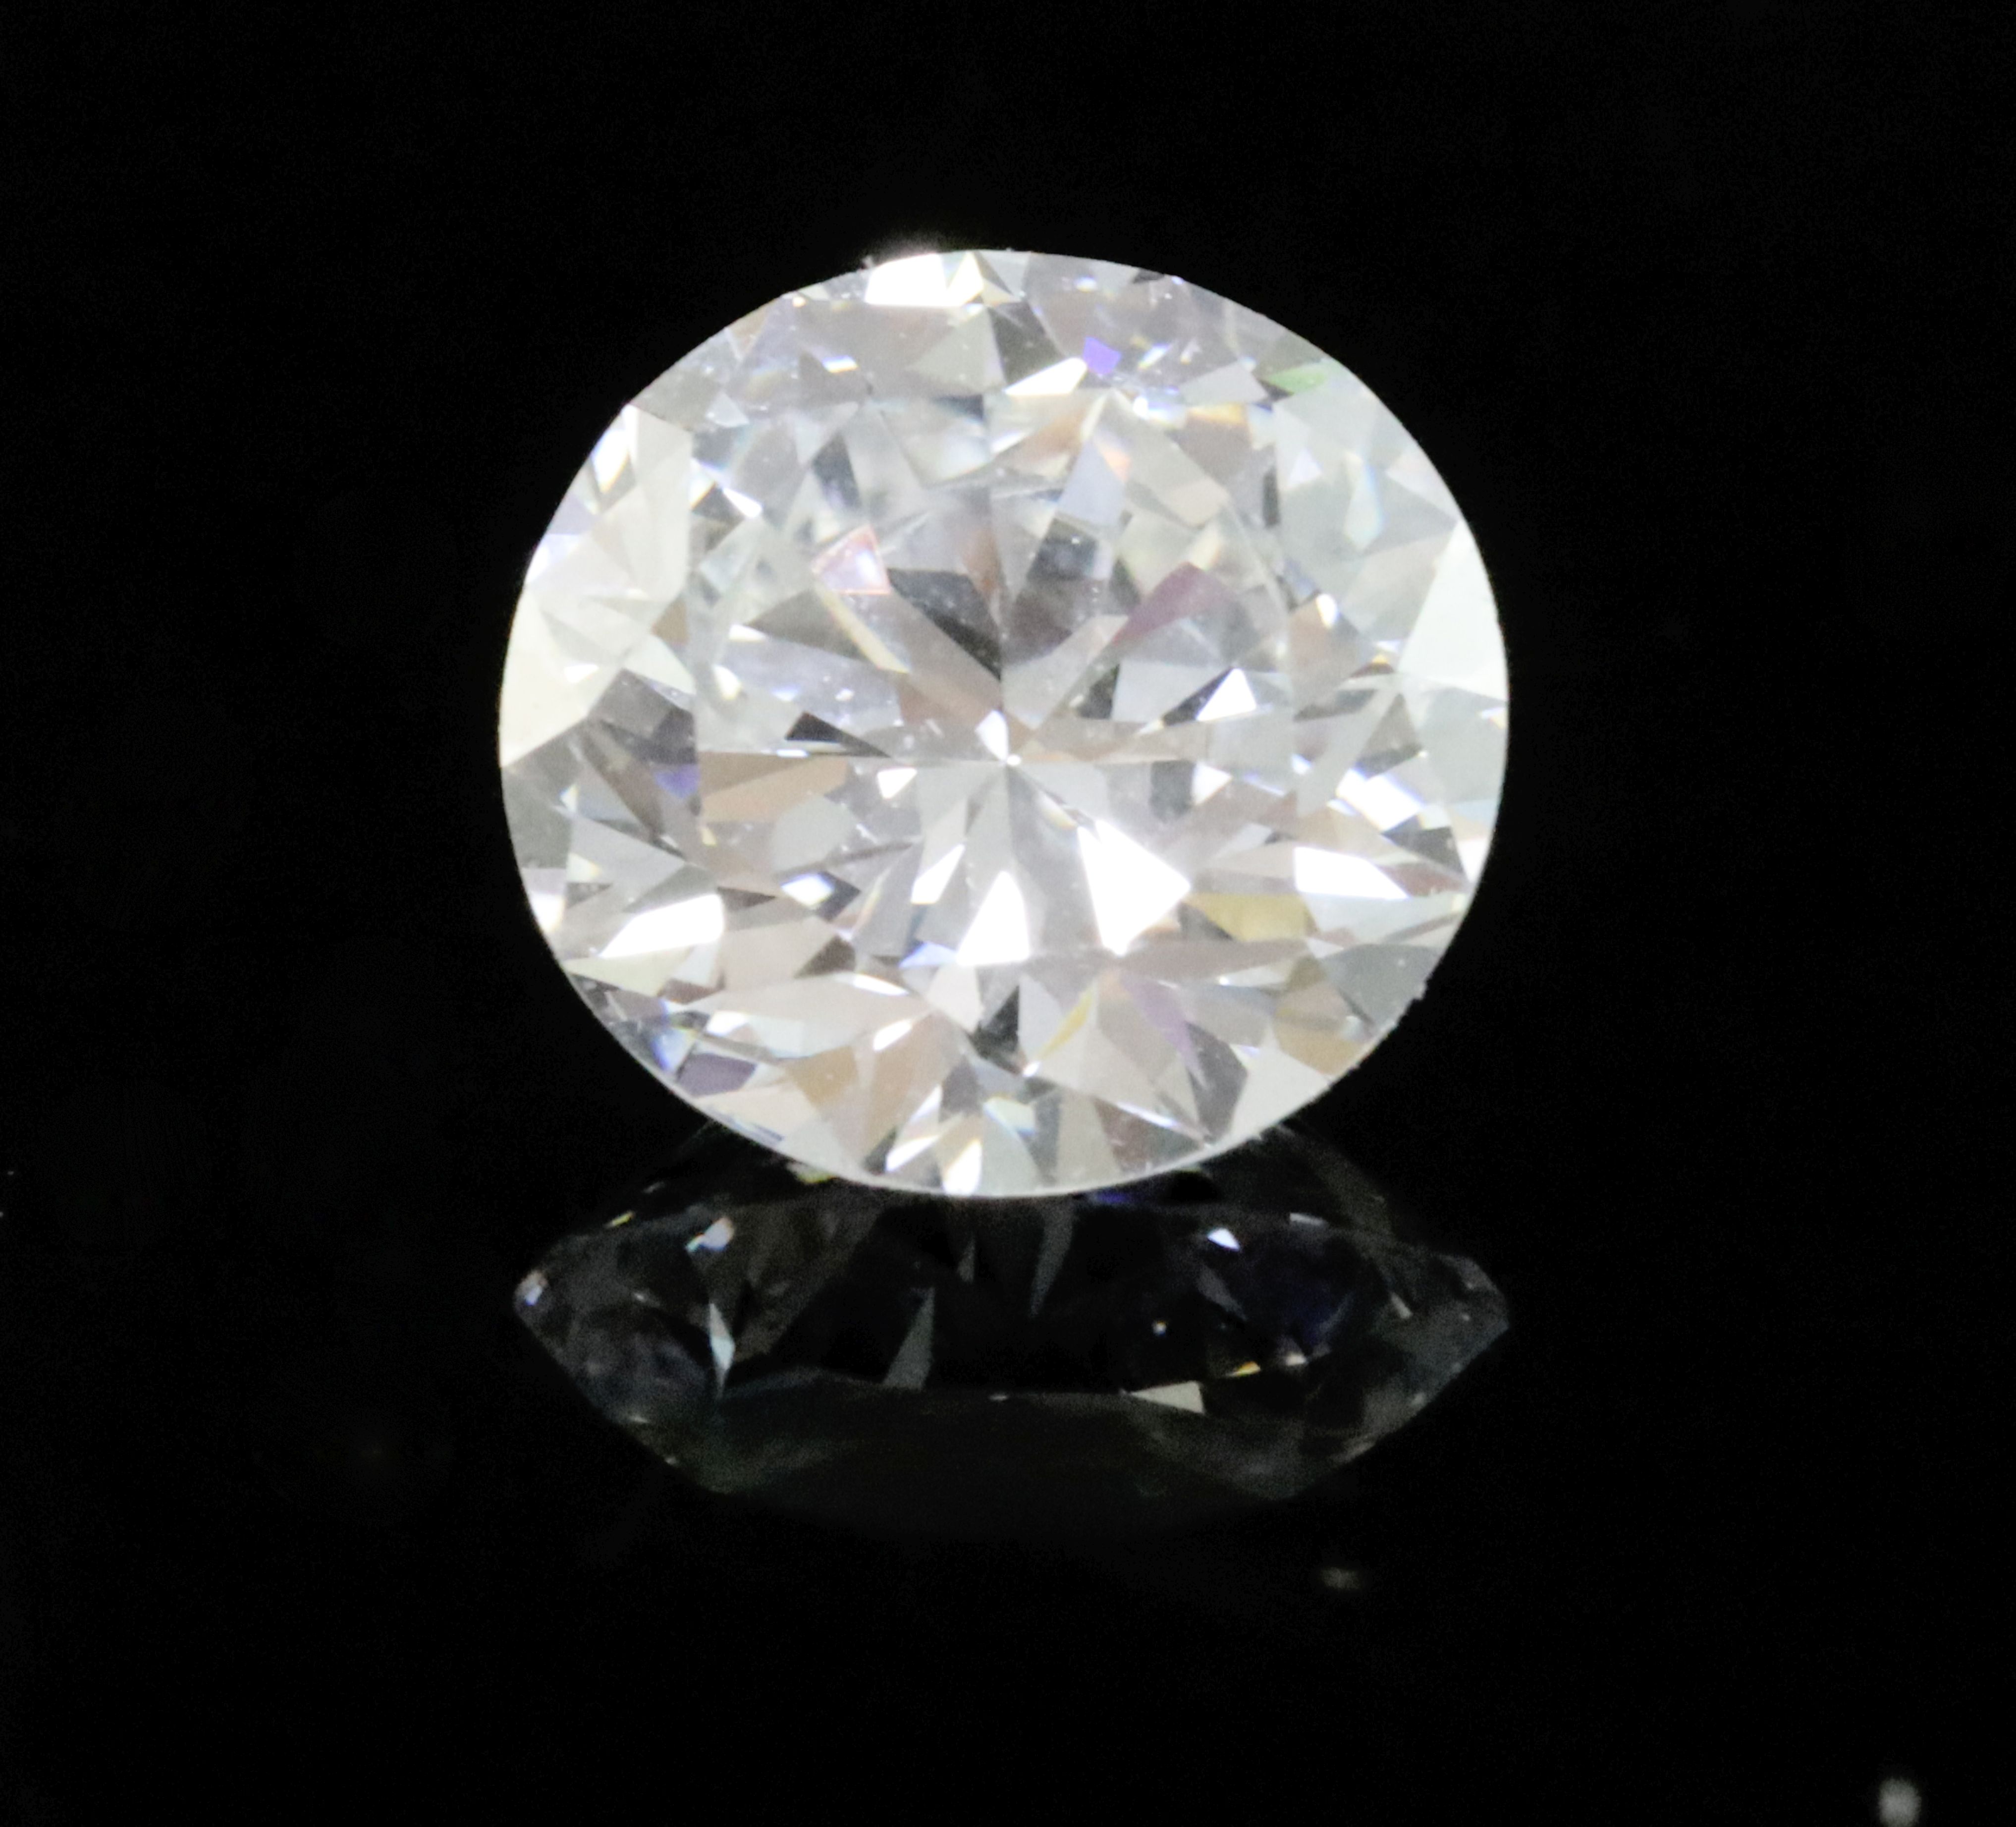 An unmounted round brilliant cut diamond, weighing approximately 1.05cts.